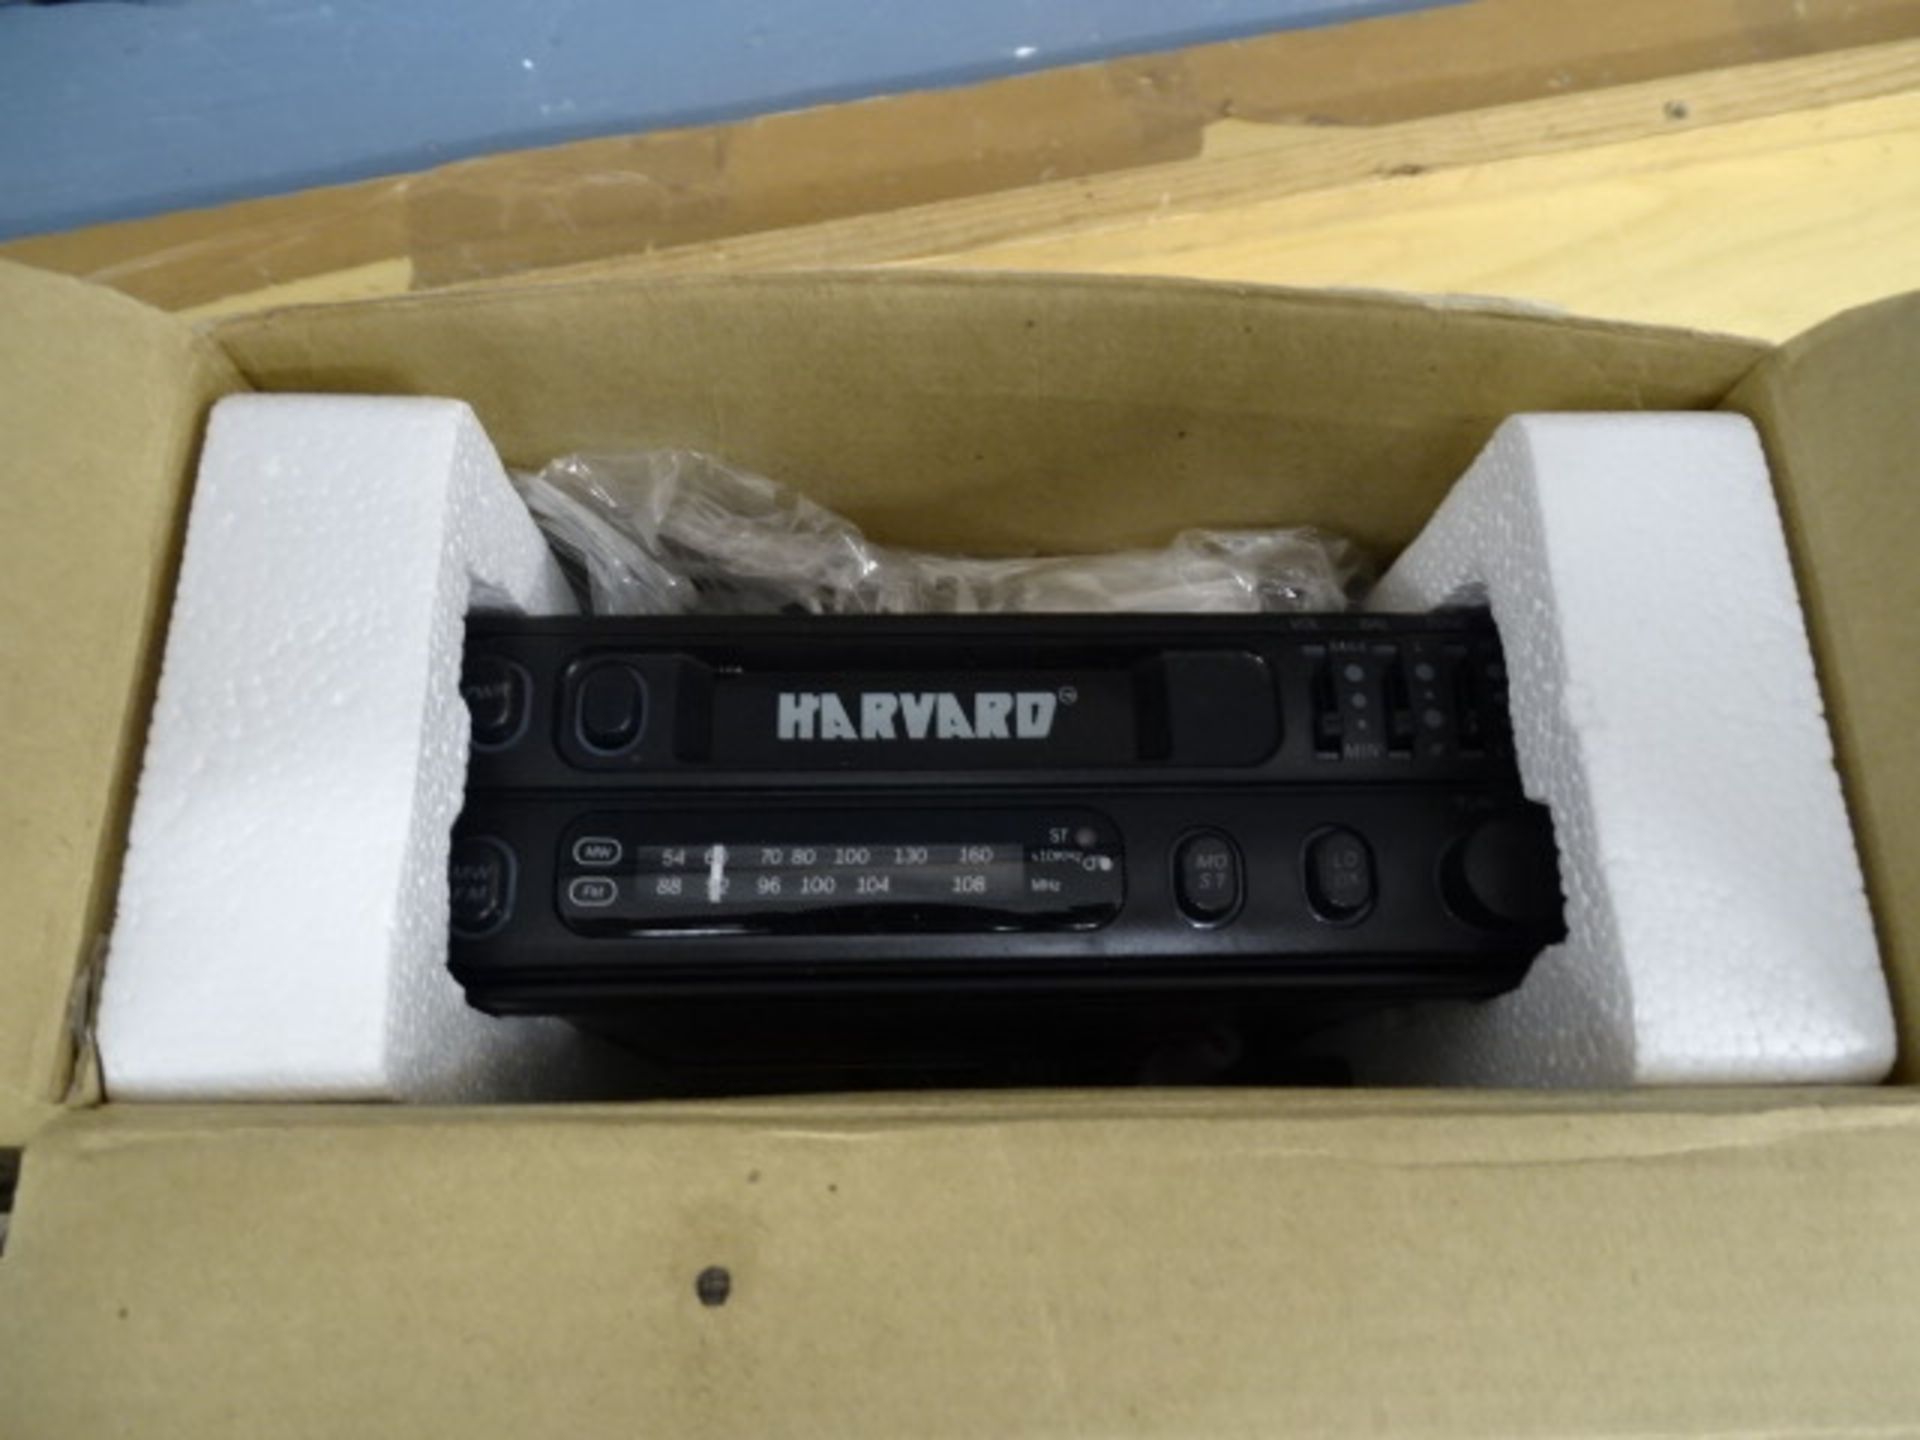 Boxed Harvard car radio cassette player and Olympus camera from a house clearance - Image 4 of 4